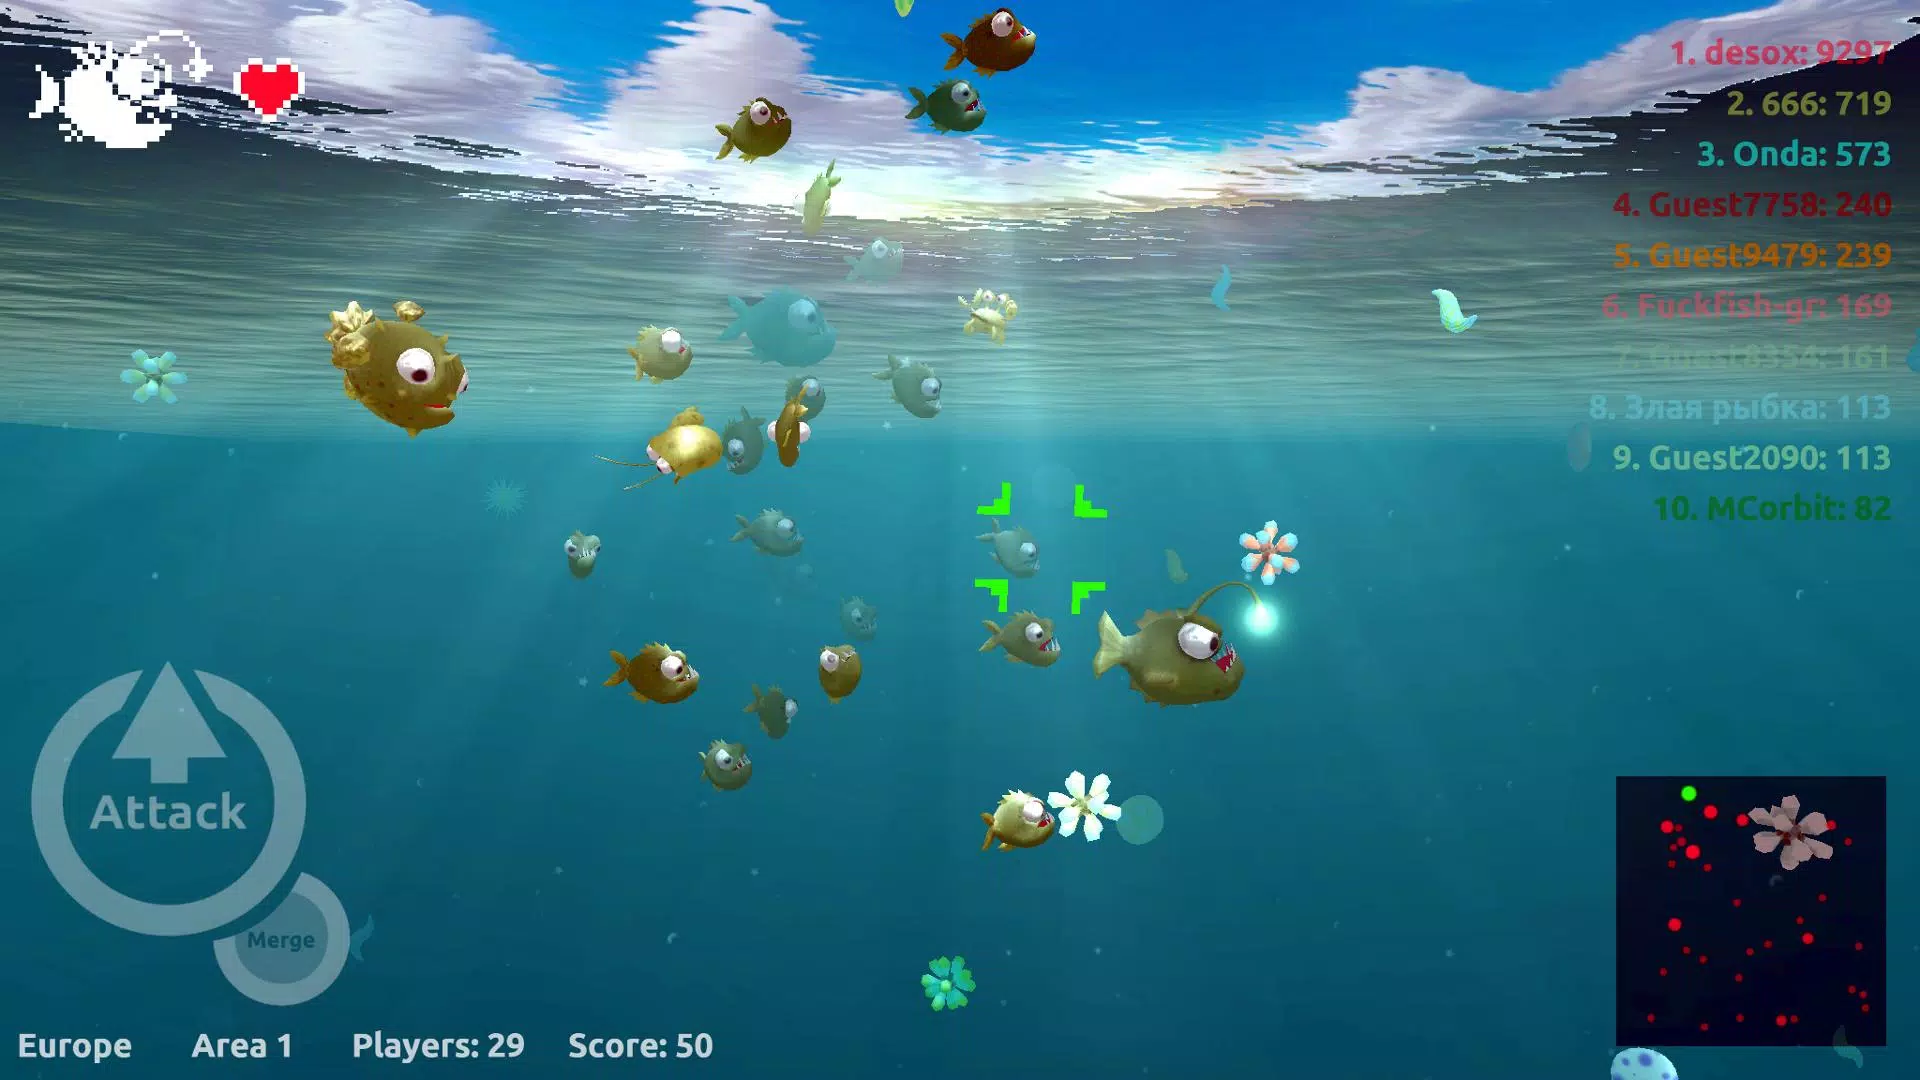 Oceanar.io  Play the Game for Free on PacoGames